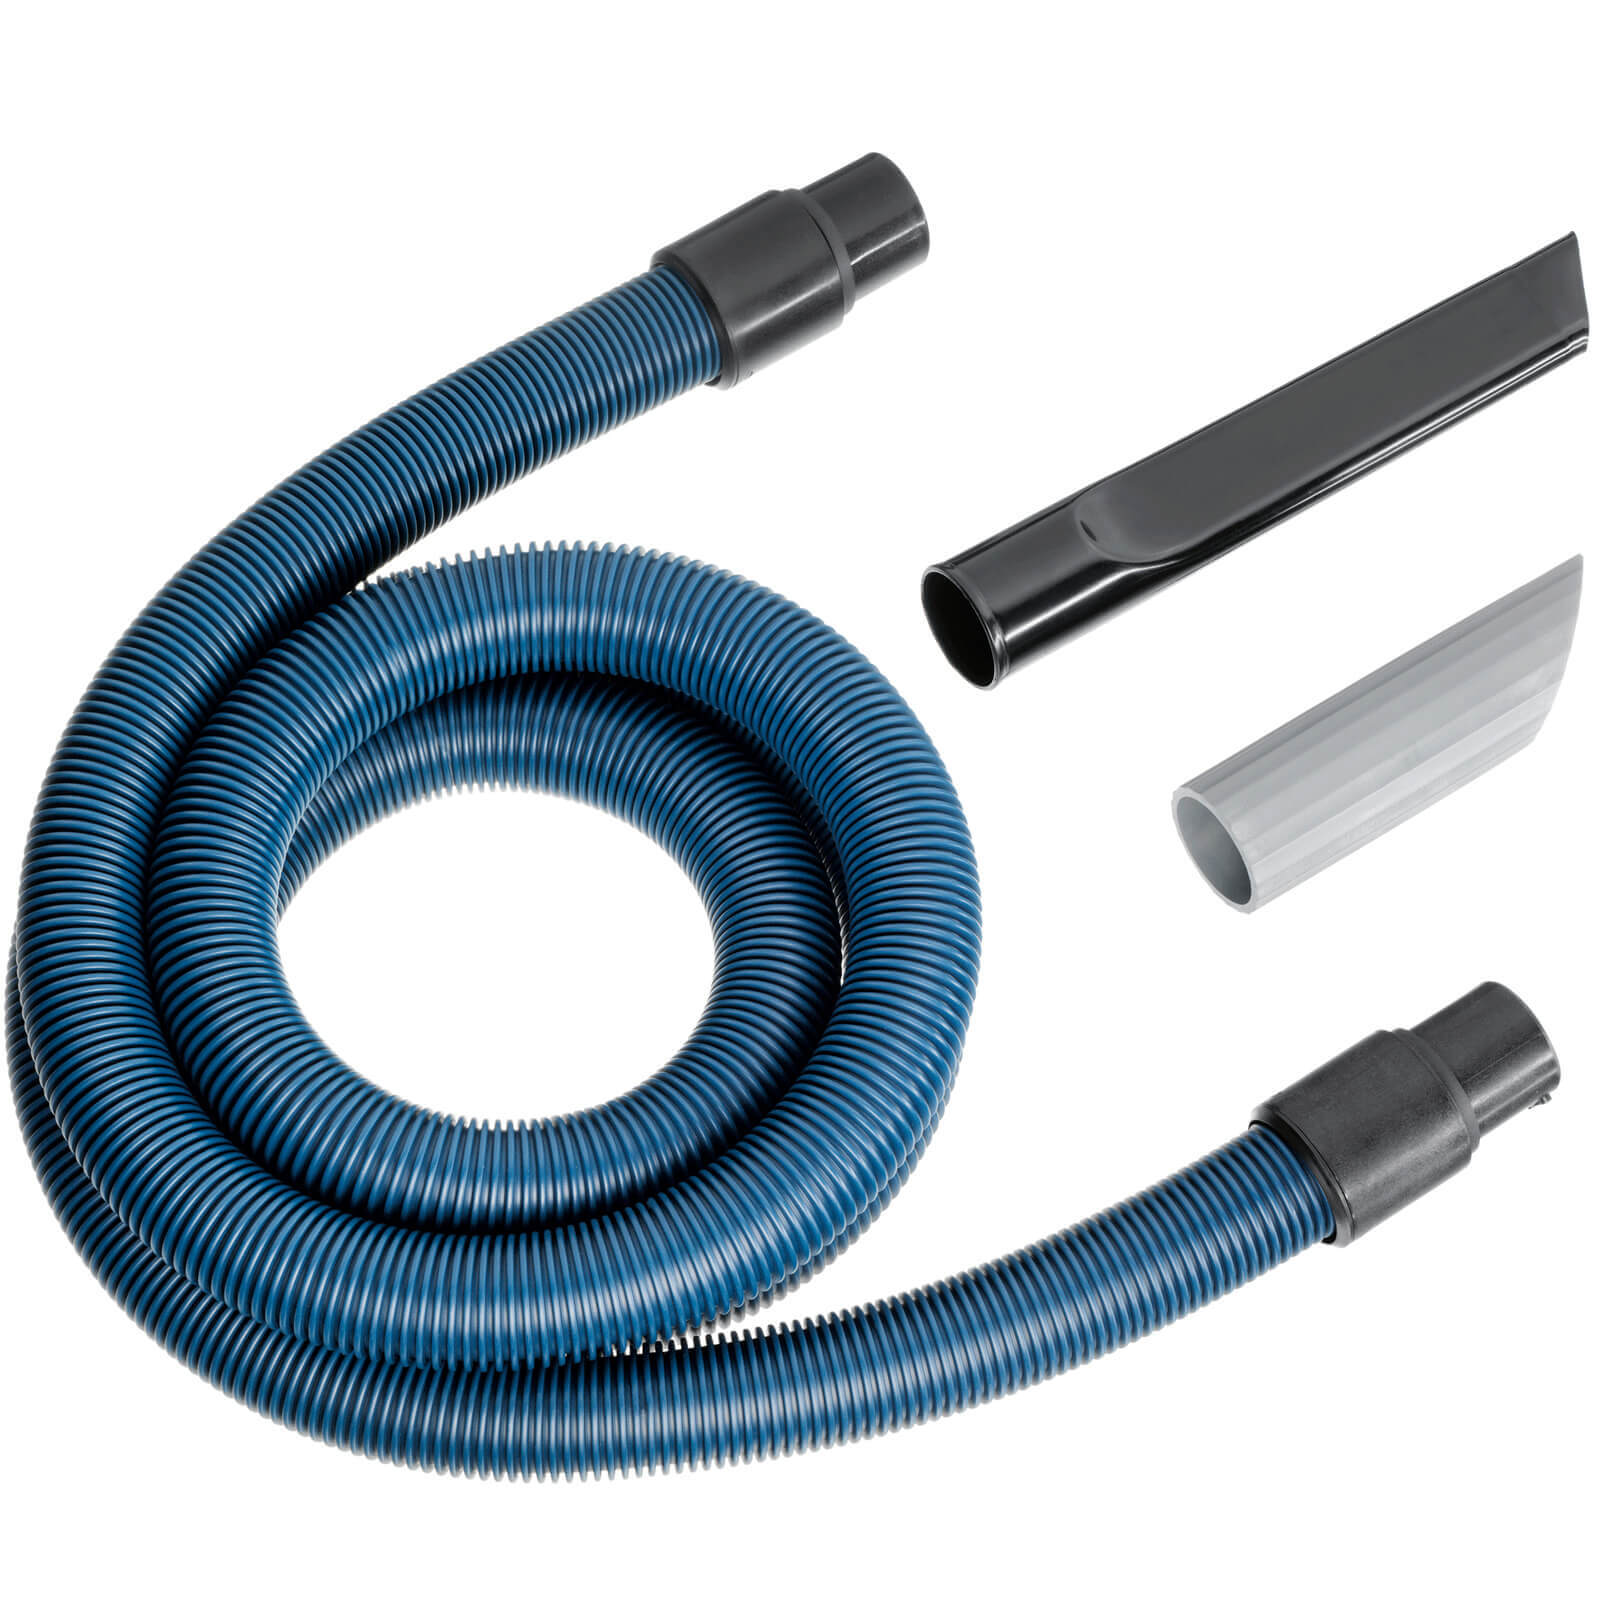 Image of Karcher Oil Proof Suction Hose and Tools for NT 65/2 and 70/2 Vacuum Cleaners 40mm 4m